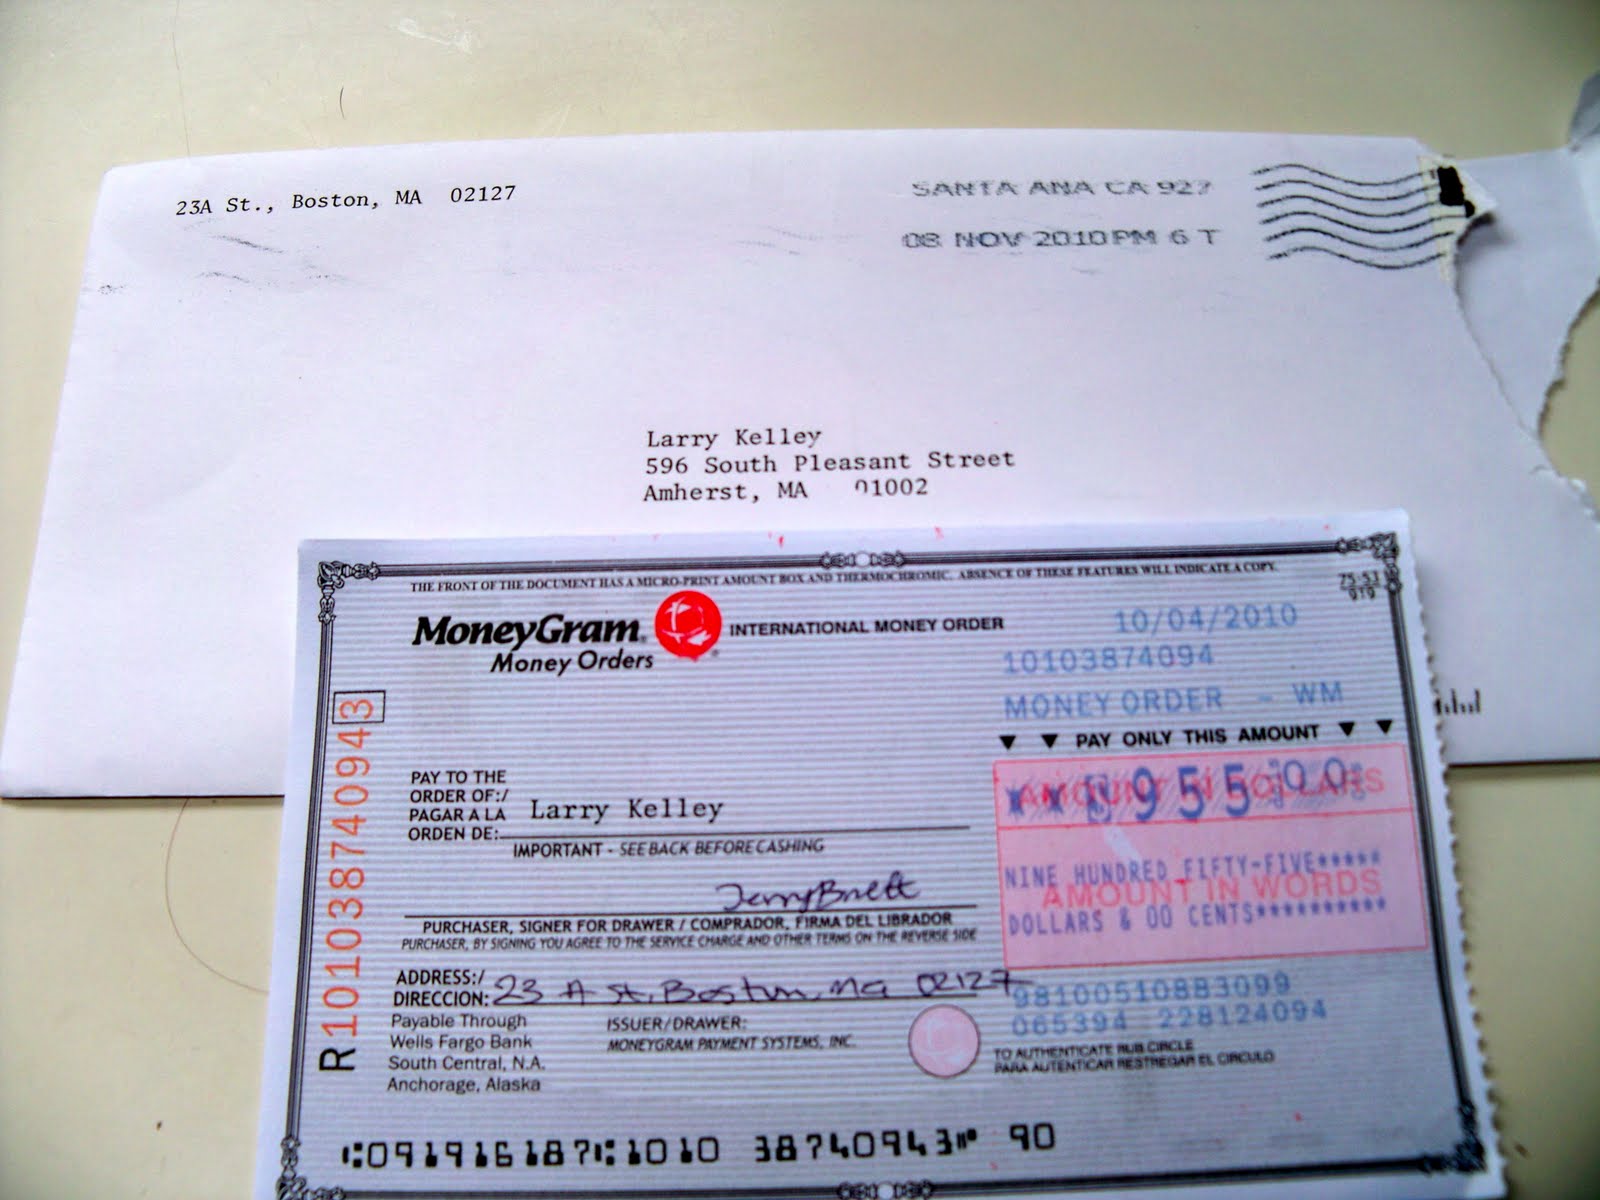 Howto: How To Fill Out A Moneygram Money Order For Rent